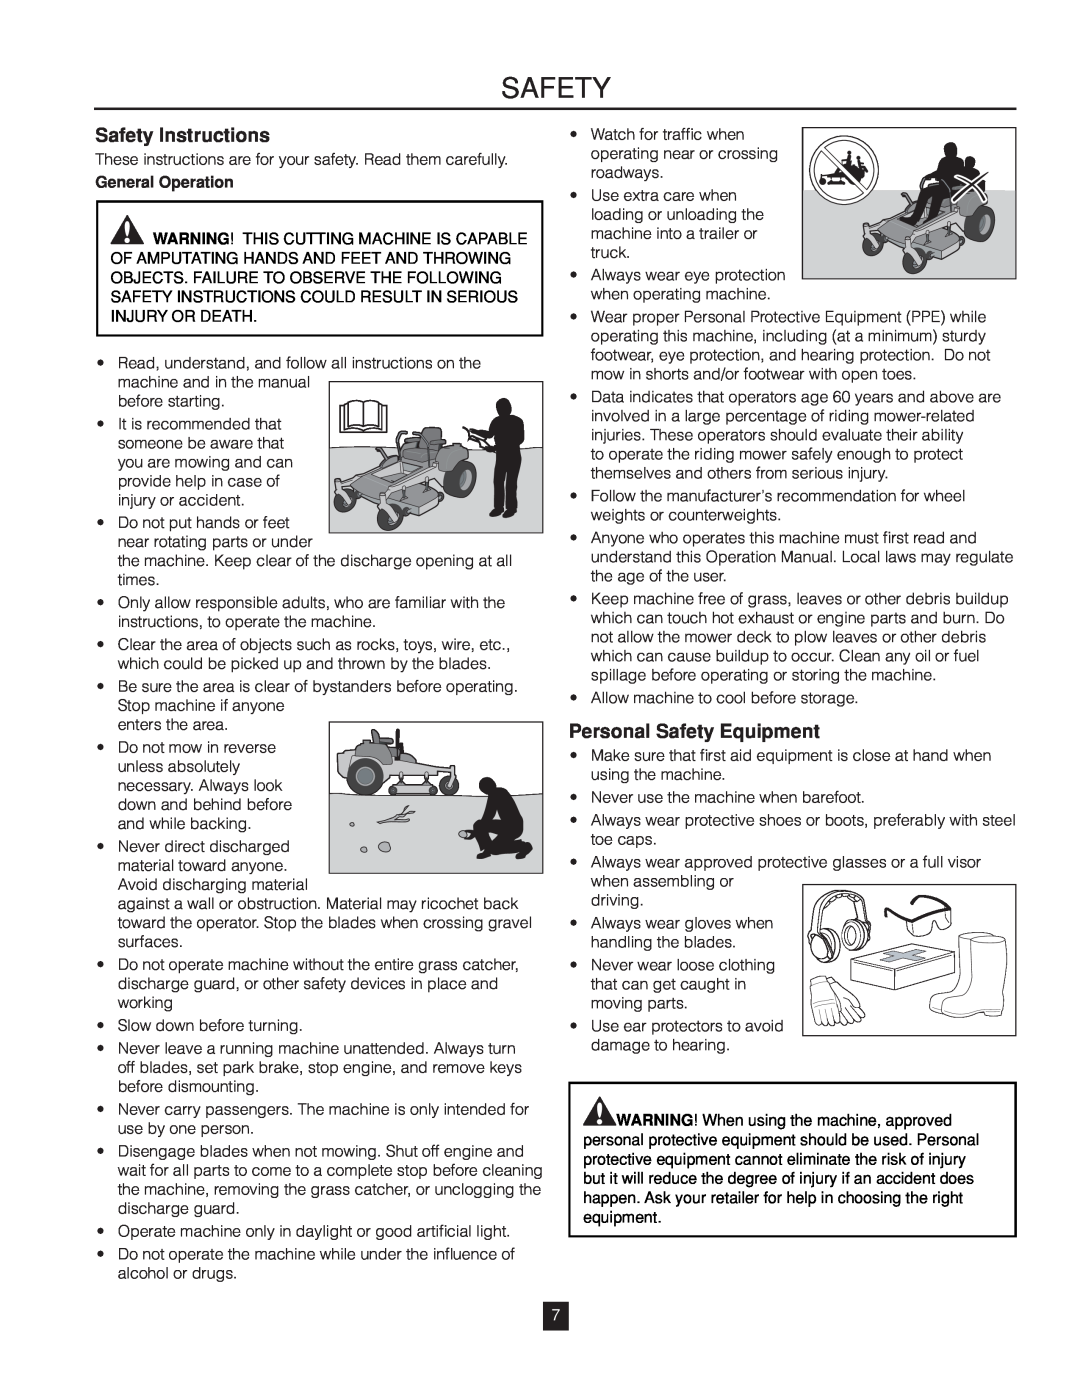 Husqvarna RZ46215 warranty Safety Instructions, Personal Safety Equipment, General Operation 